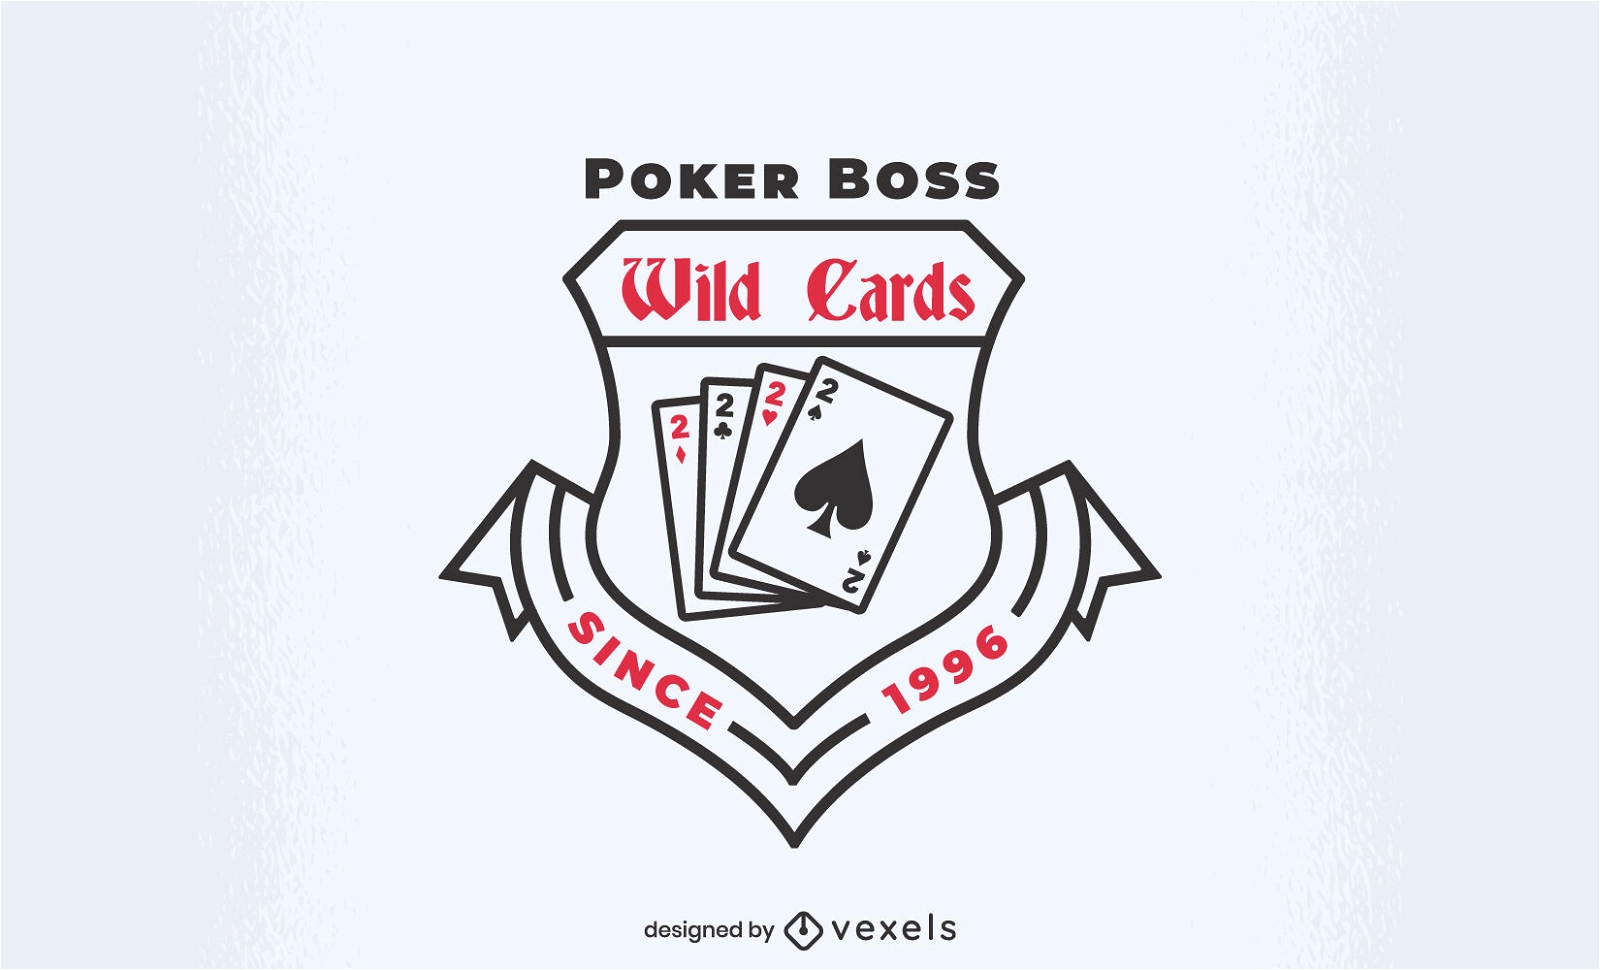 Playing cards business logo design